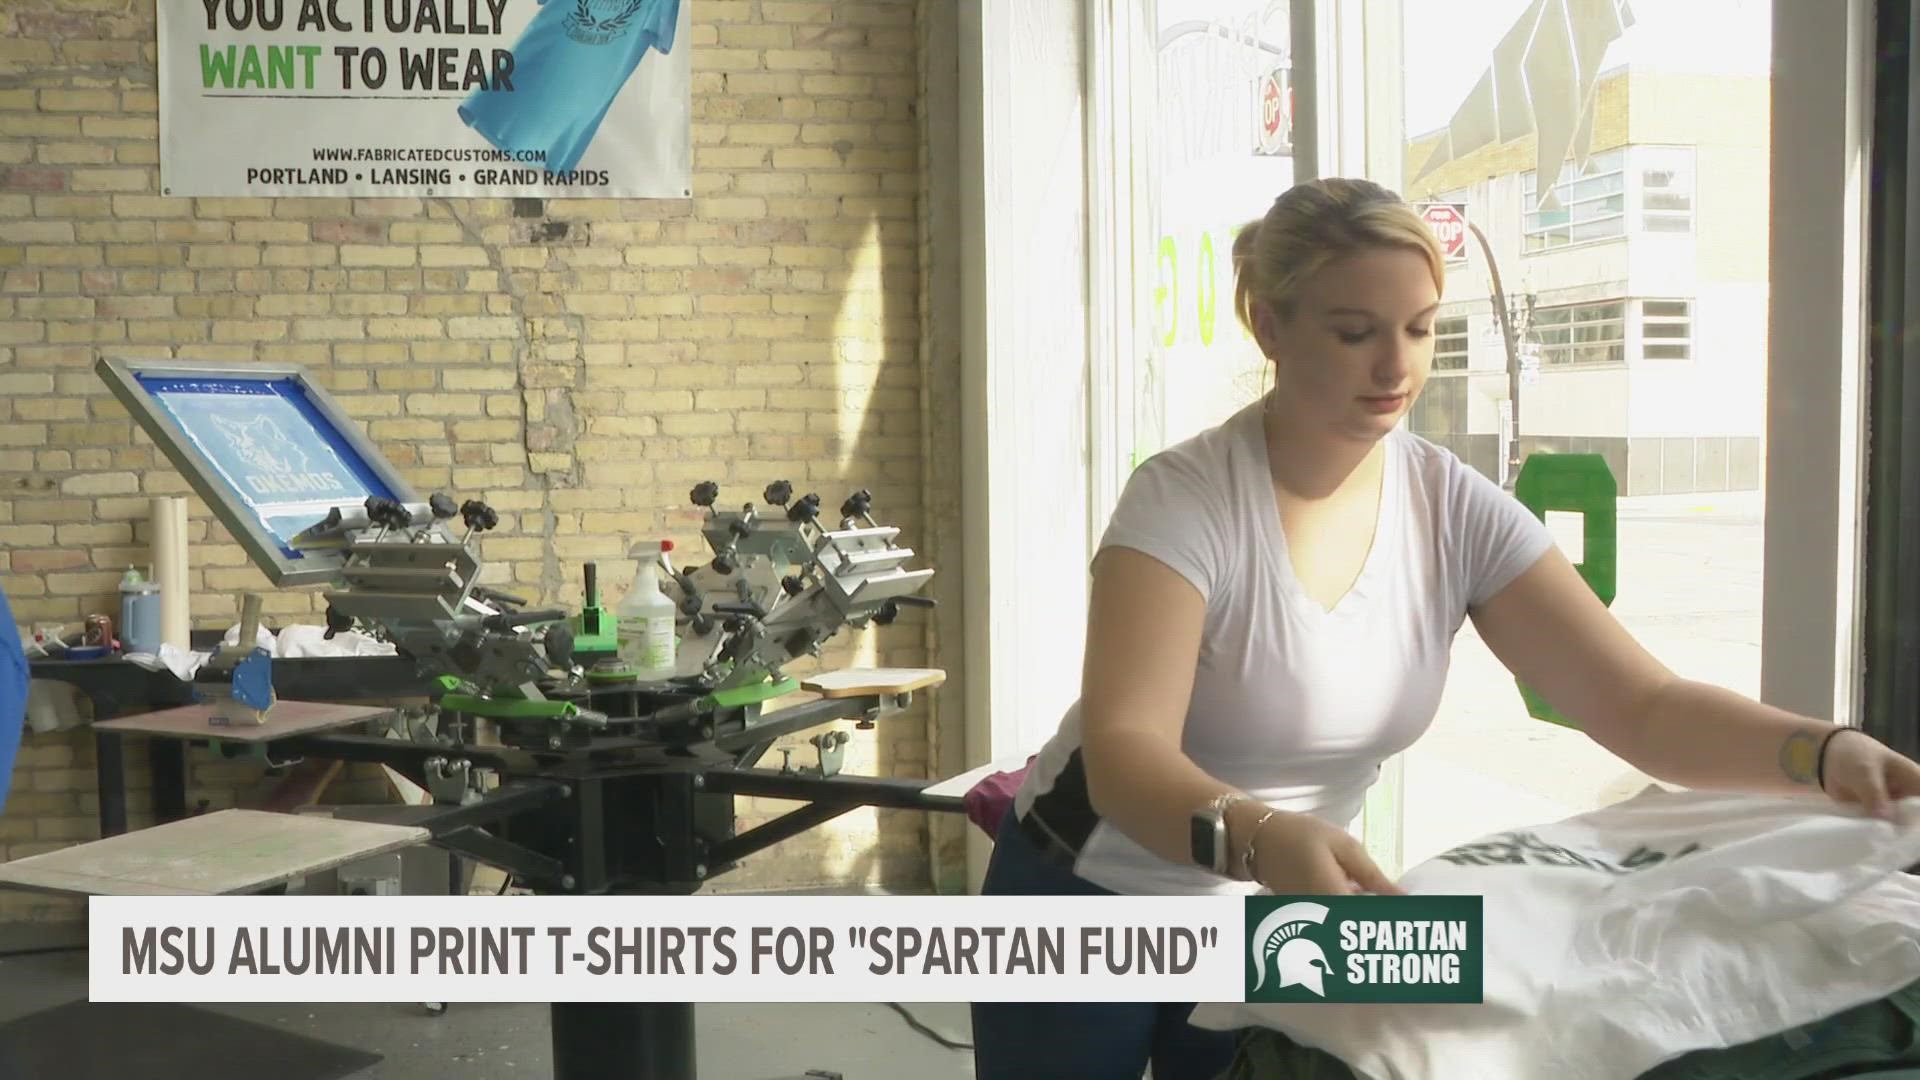 In the days following the shooting at Michigan State University, people from all over the country have thought of ways they could help the Spartan community.